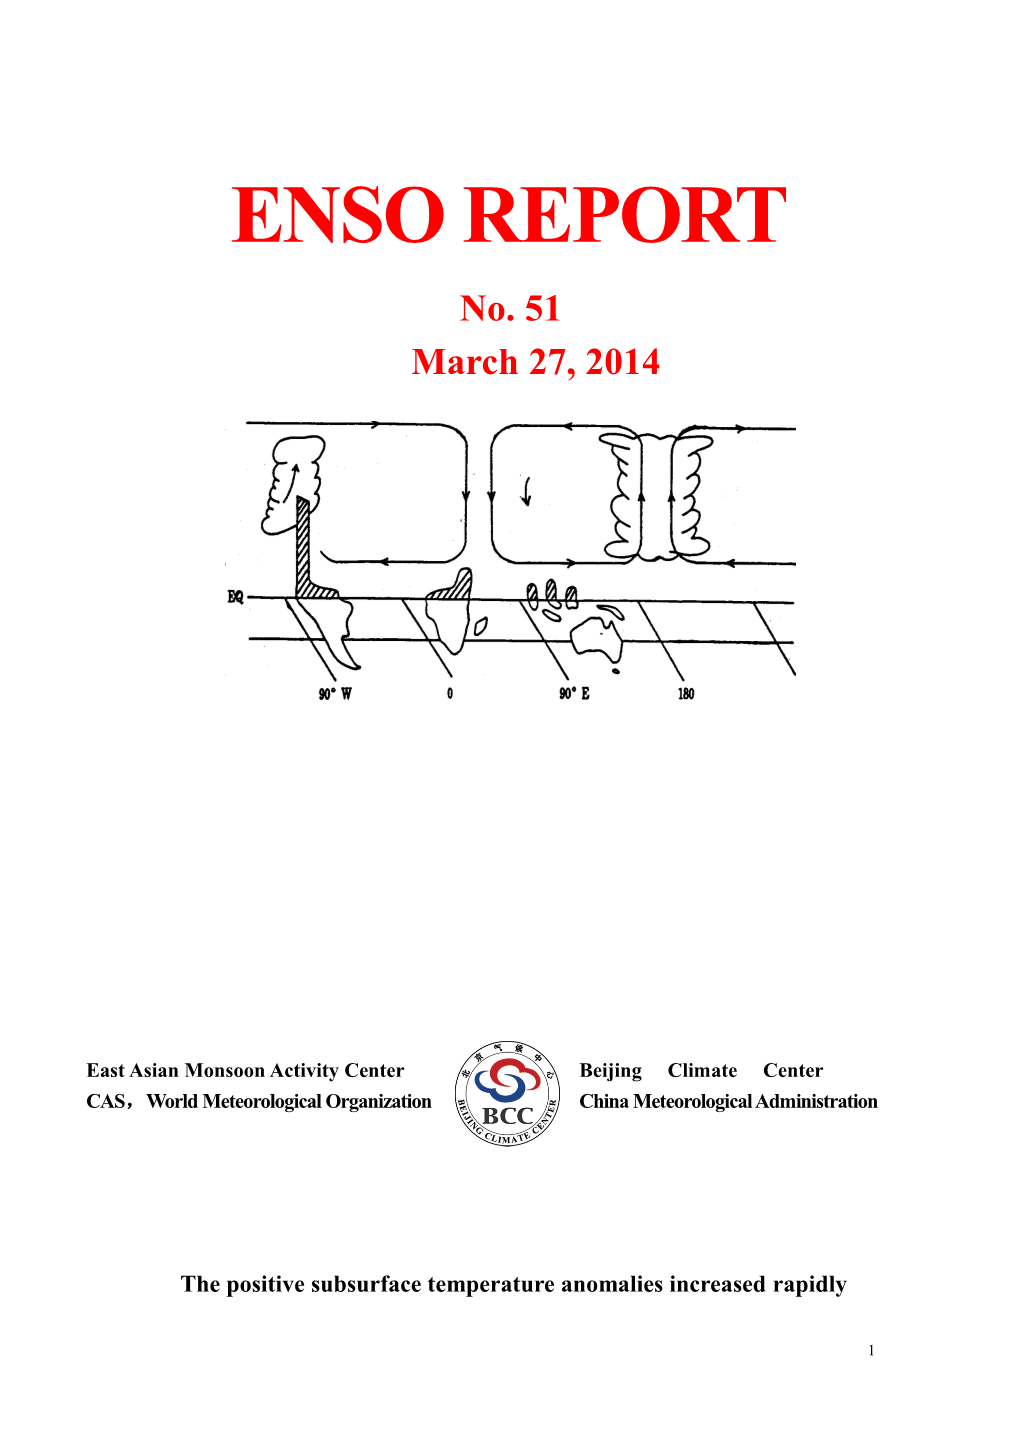 1. Recent Monitoring on ENSO Evolution